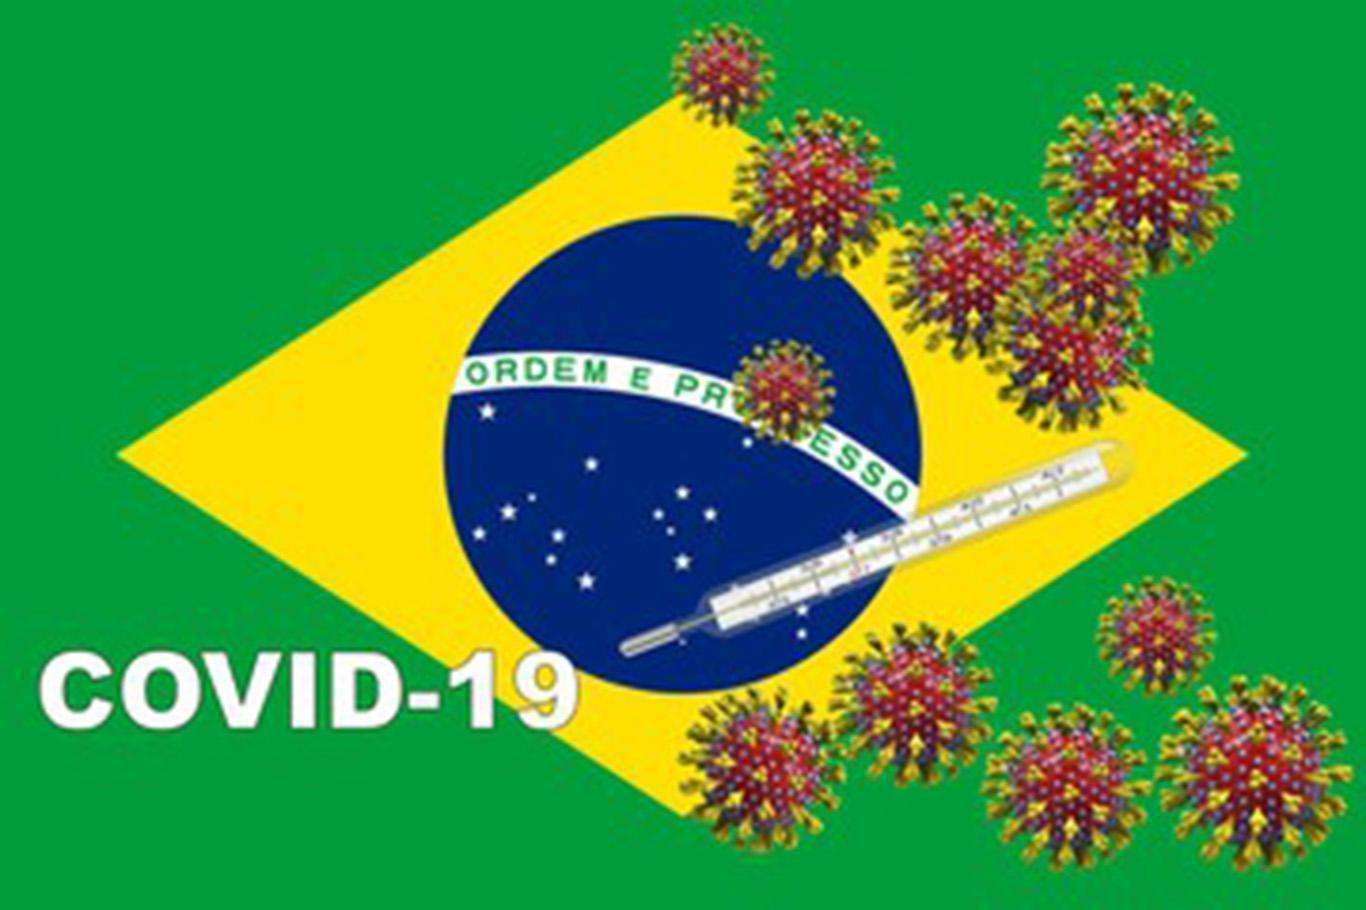 Brazil reports 16,282 daily confirmed cases of COVID-19